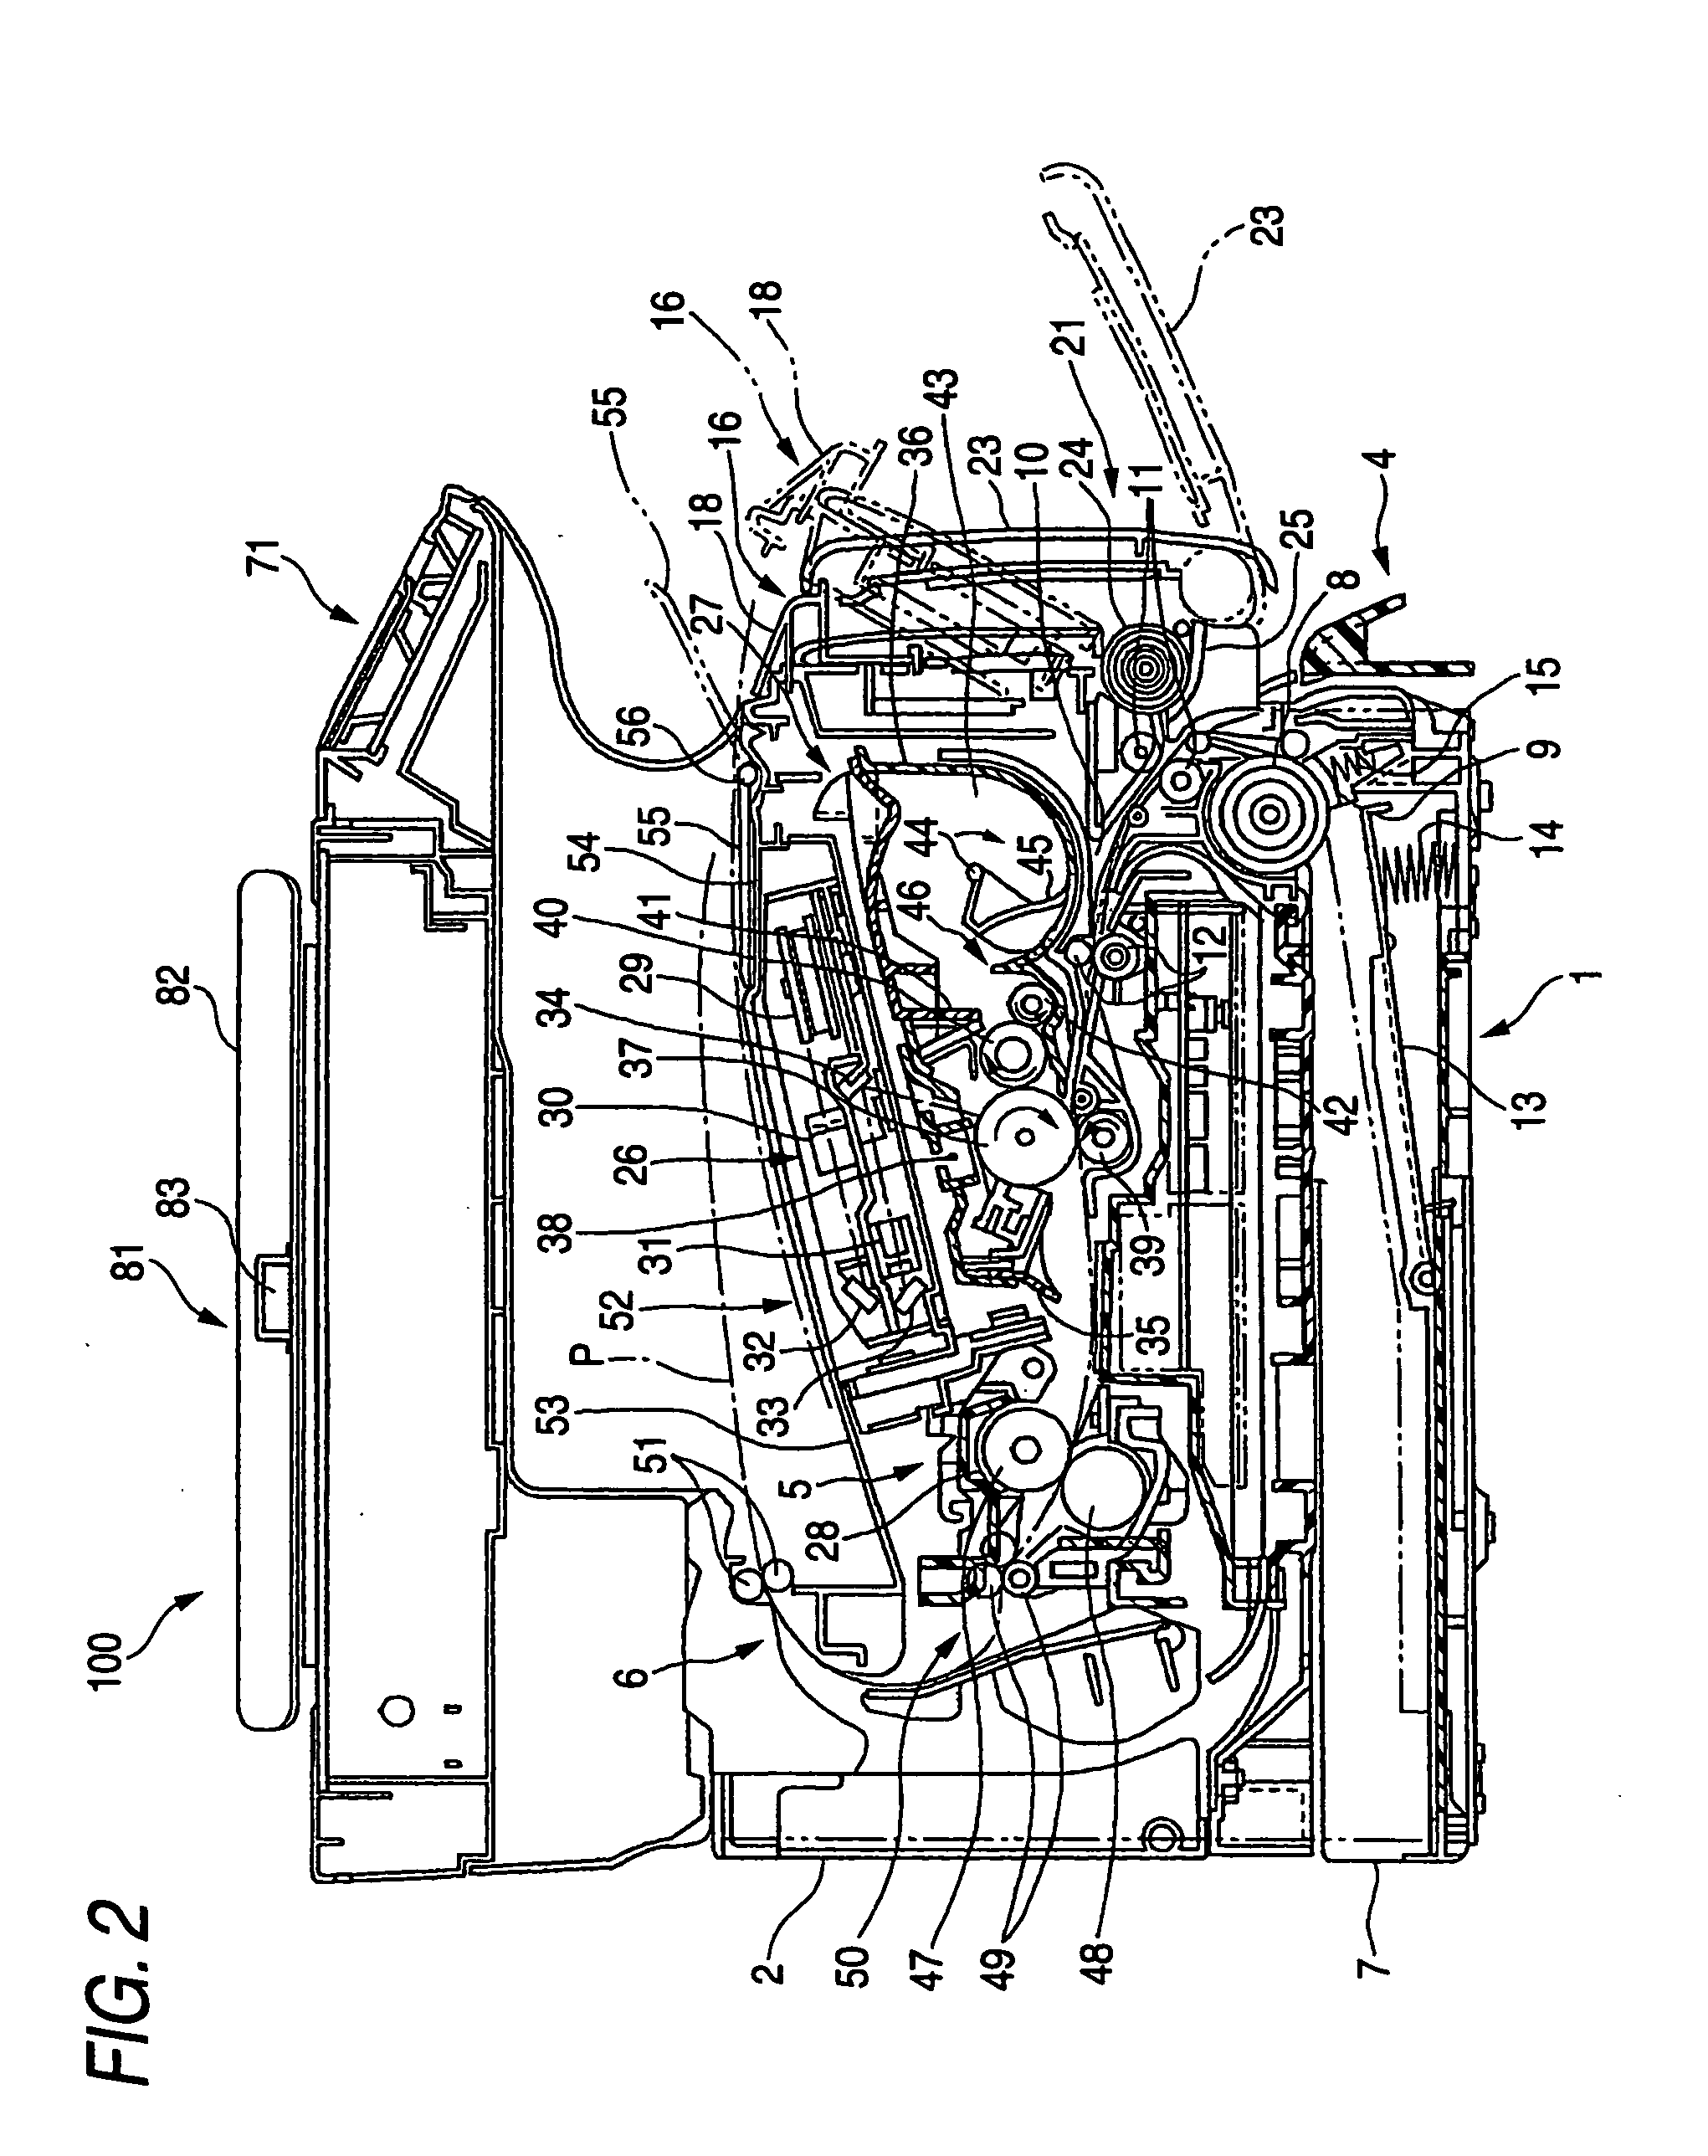 Image forming apparatus, printing system, and image forming device